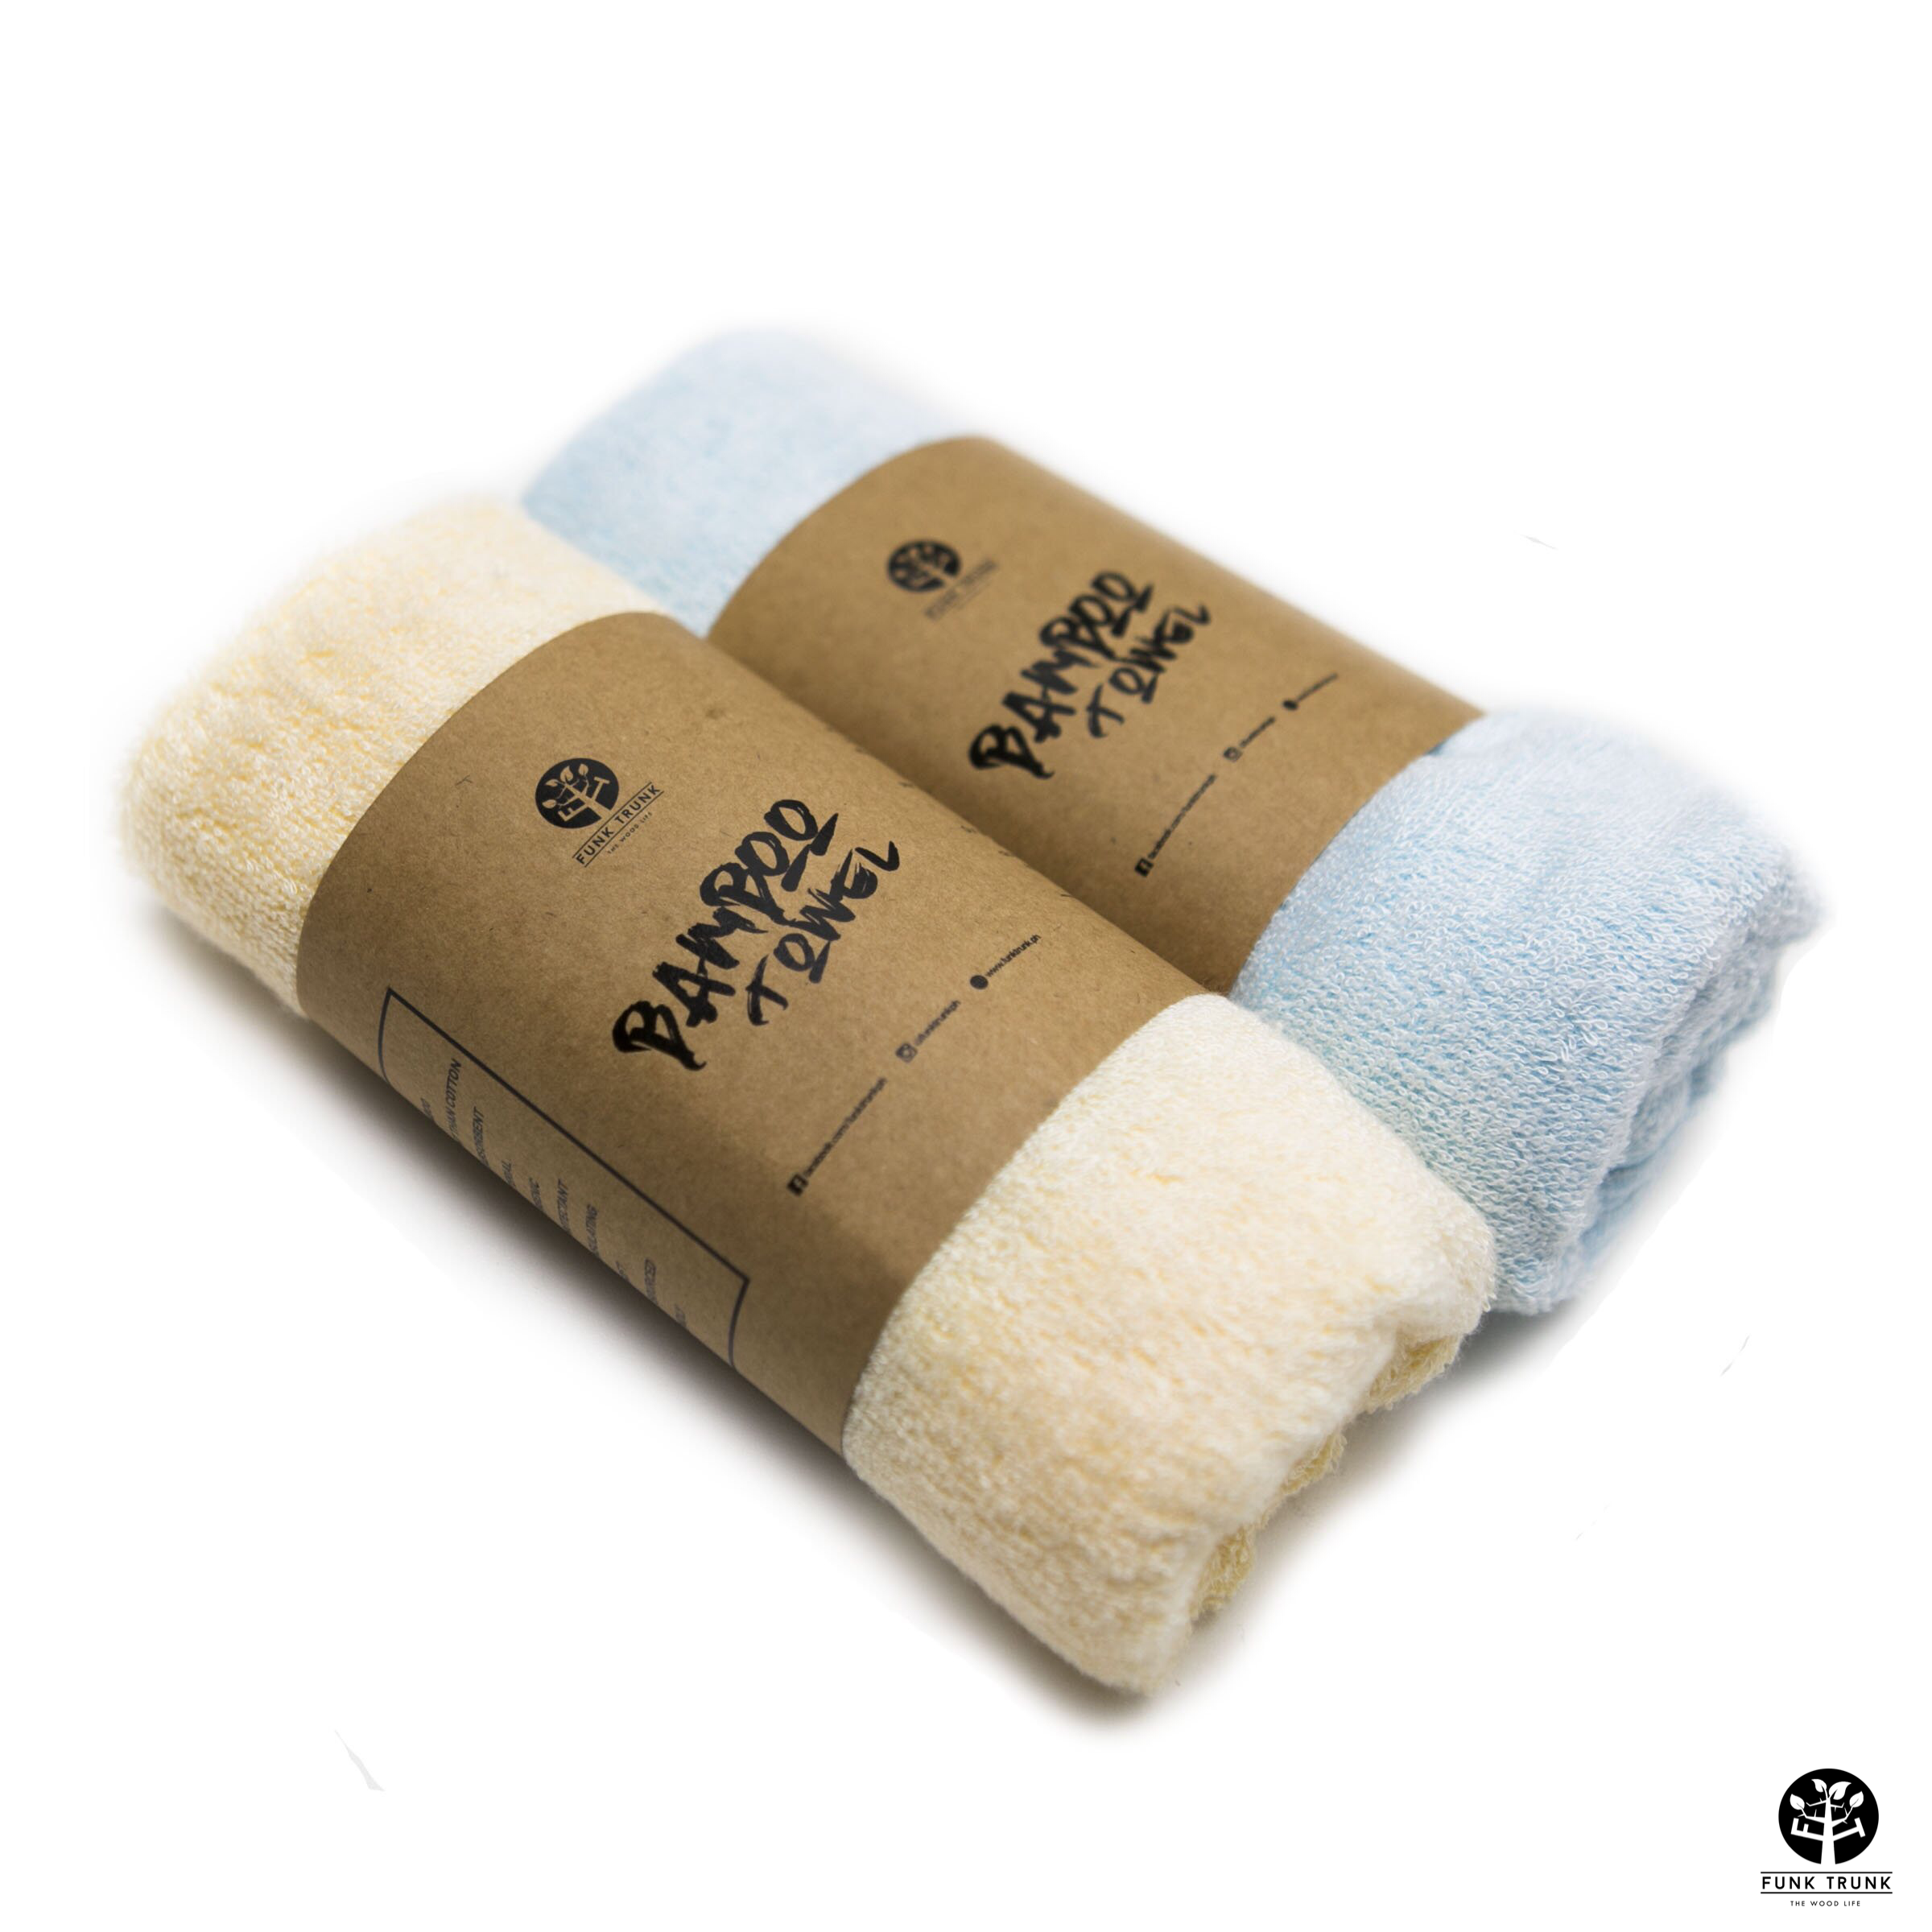 What are Benefits of Using Bamboo Towels?